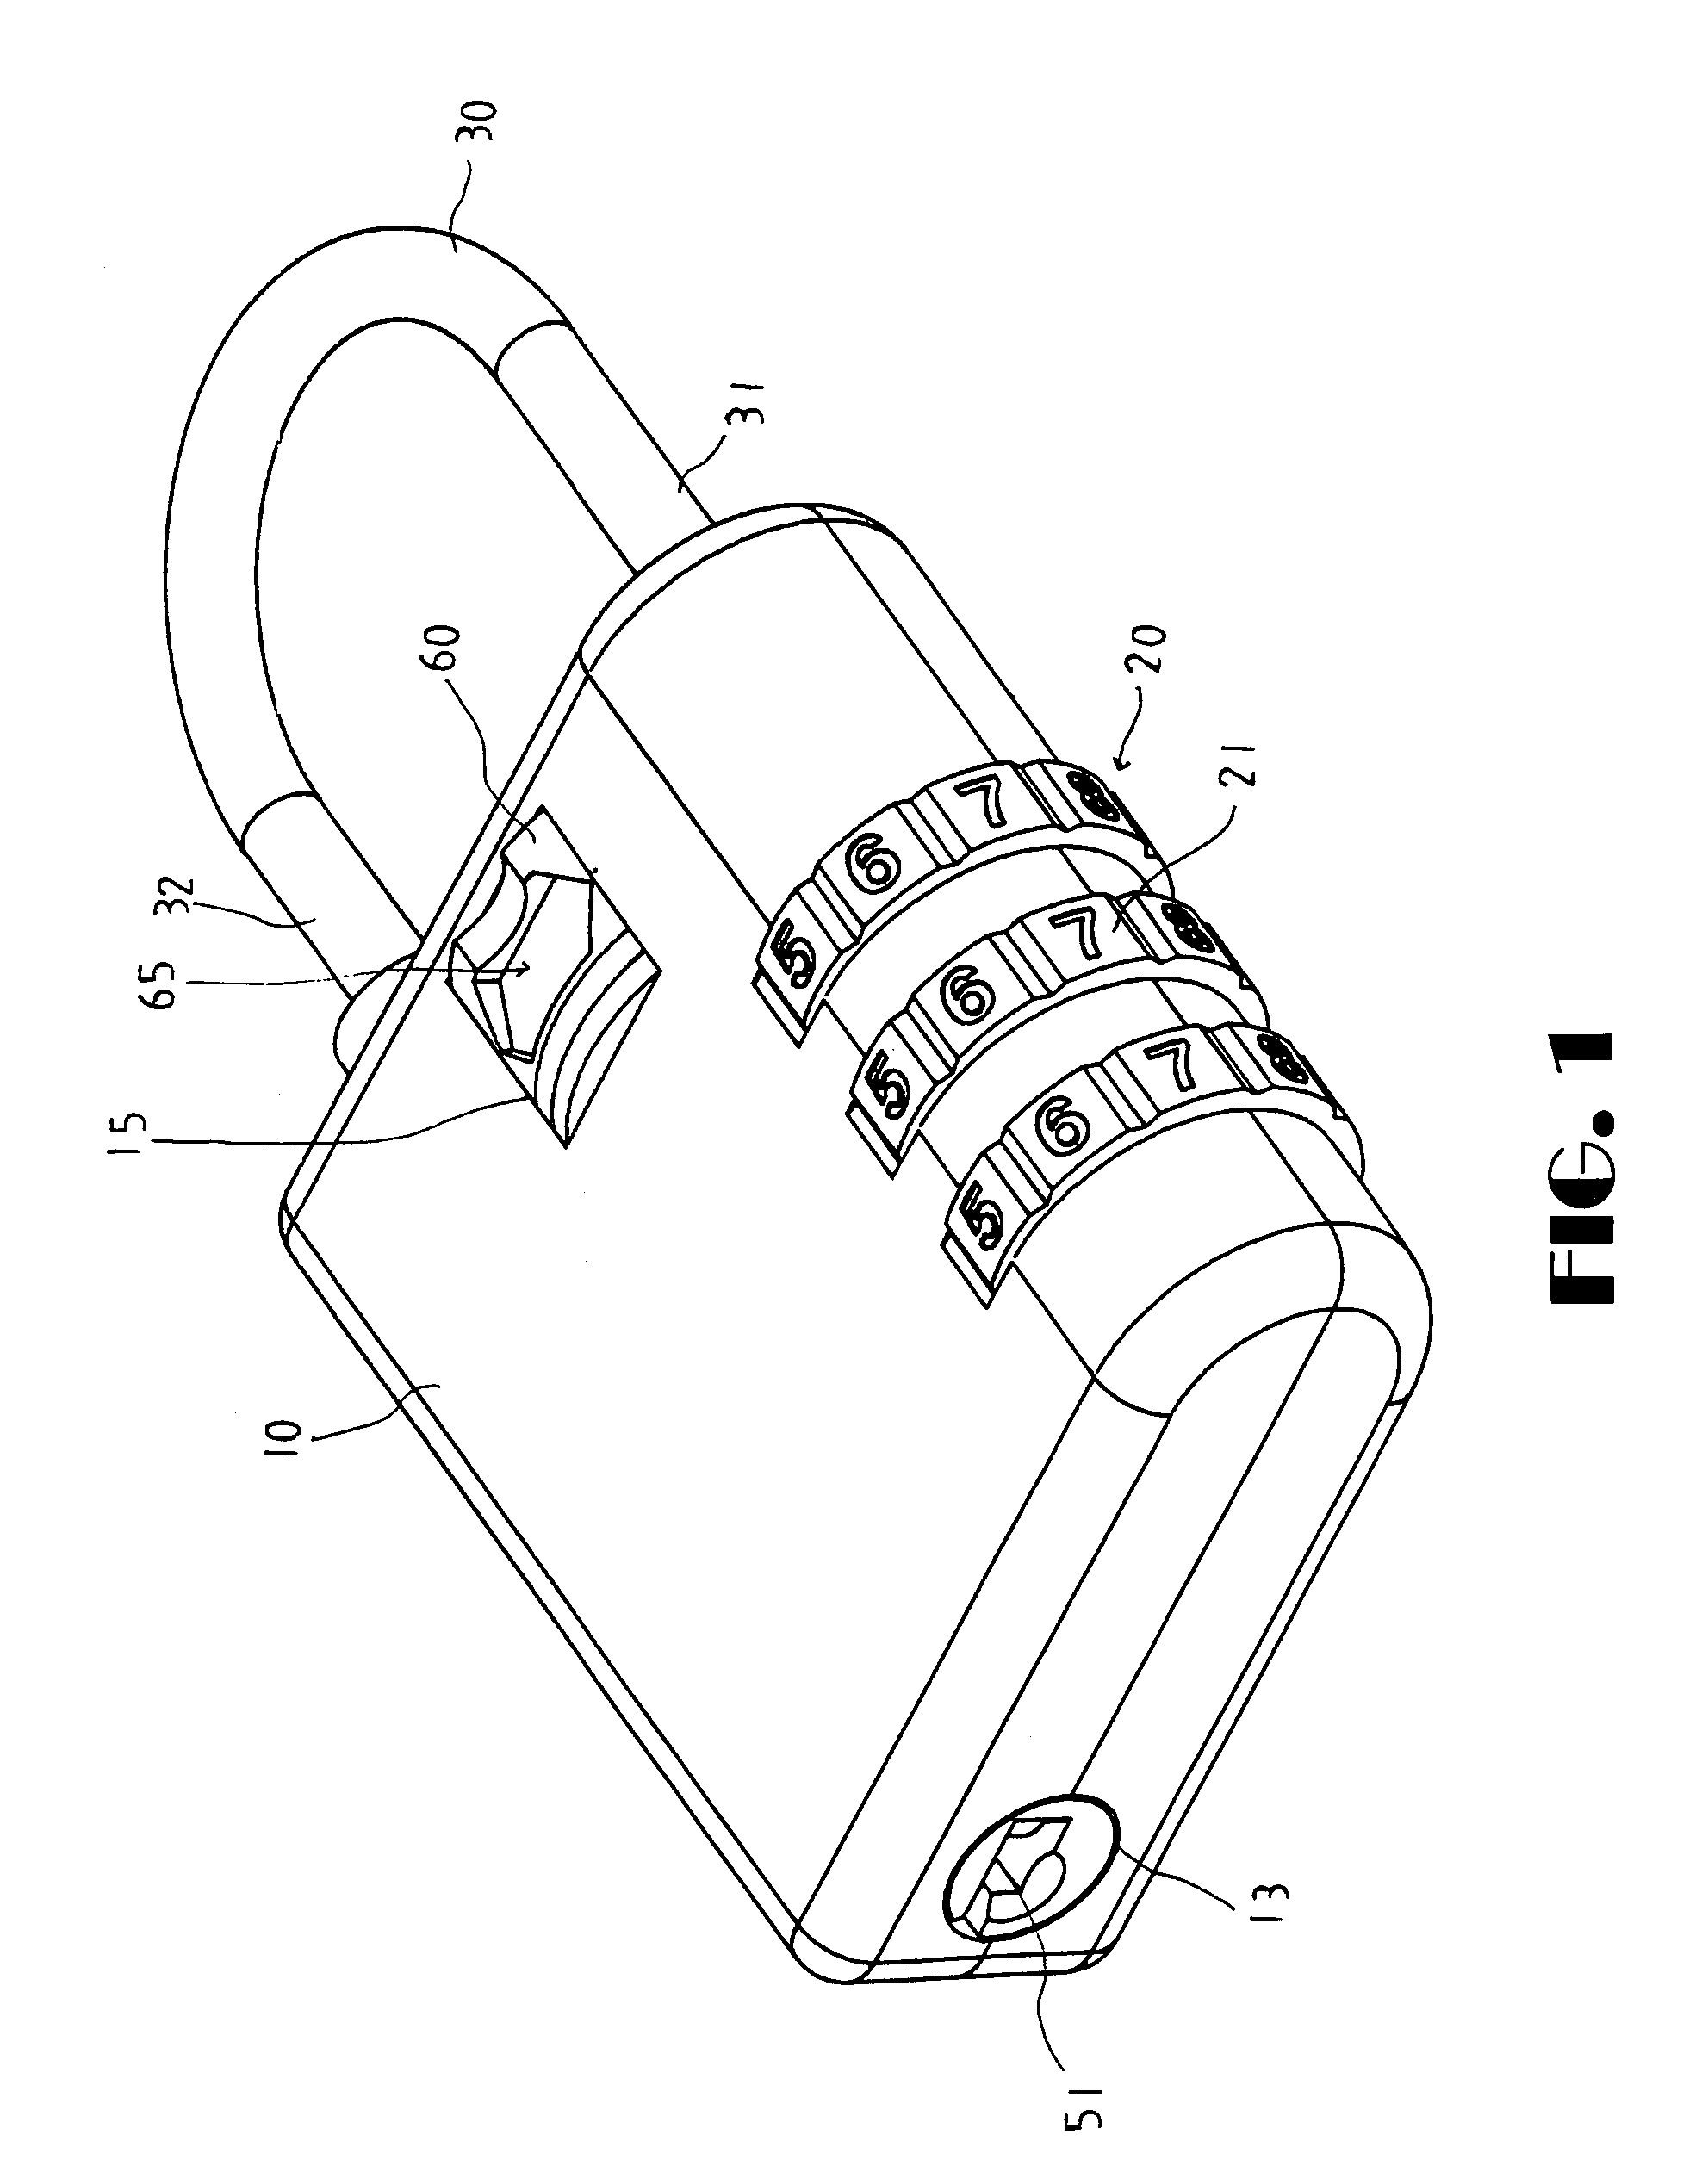 Combination lock and padlock combination with mechanism for visually indicating key opening permission